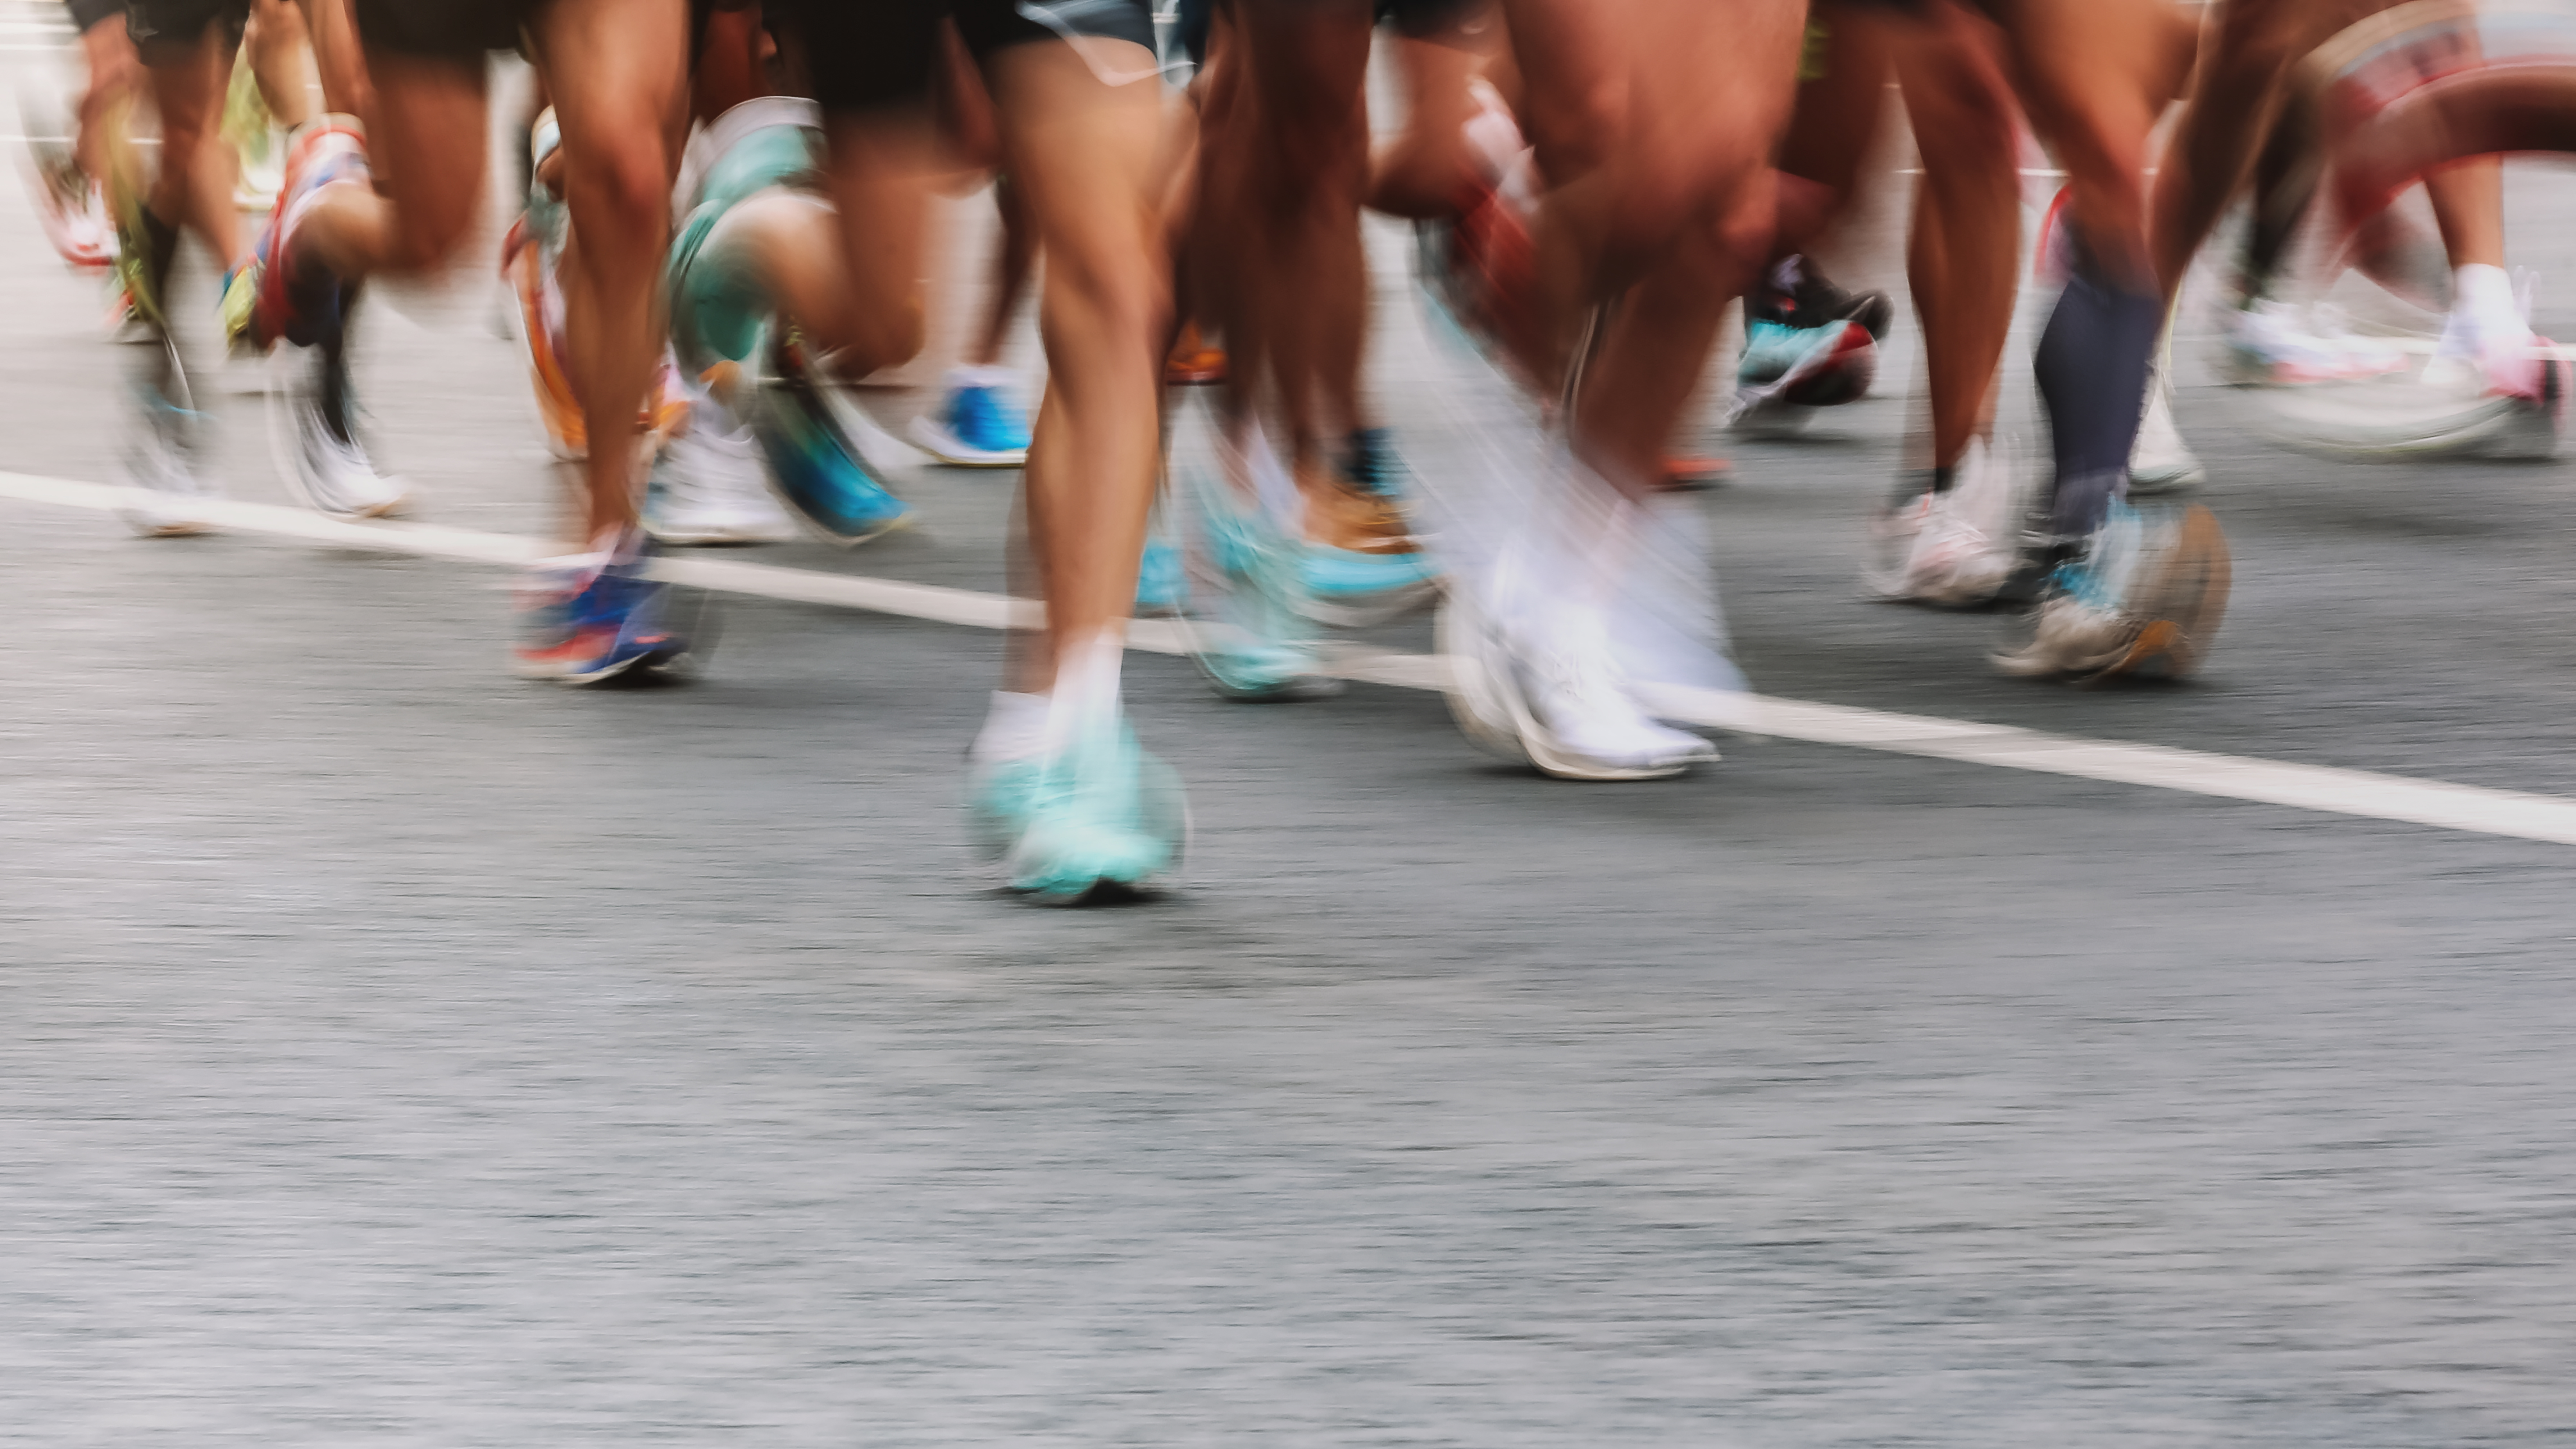 How to Prevent Common Running Injuries - InsideHook